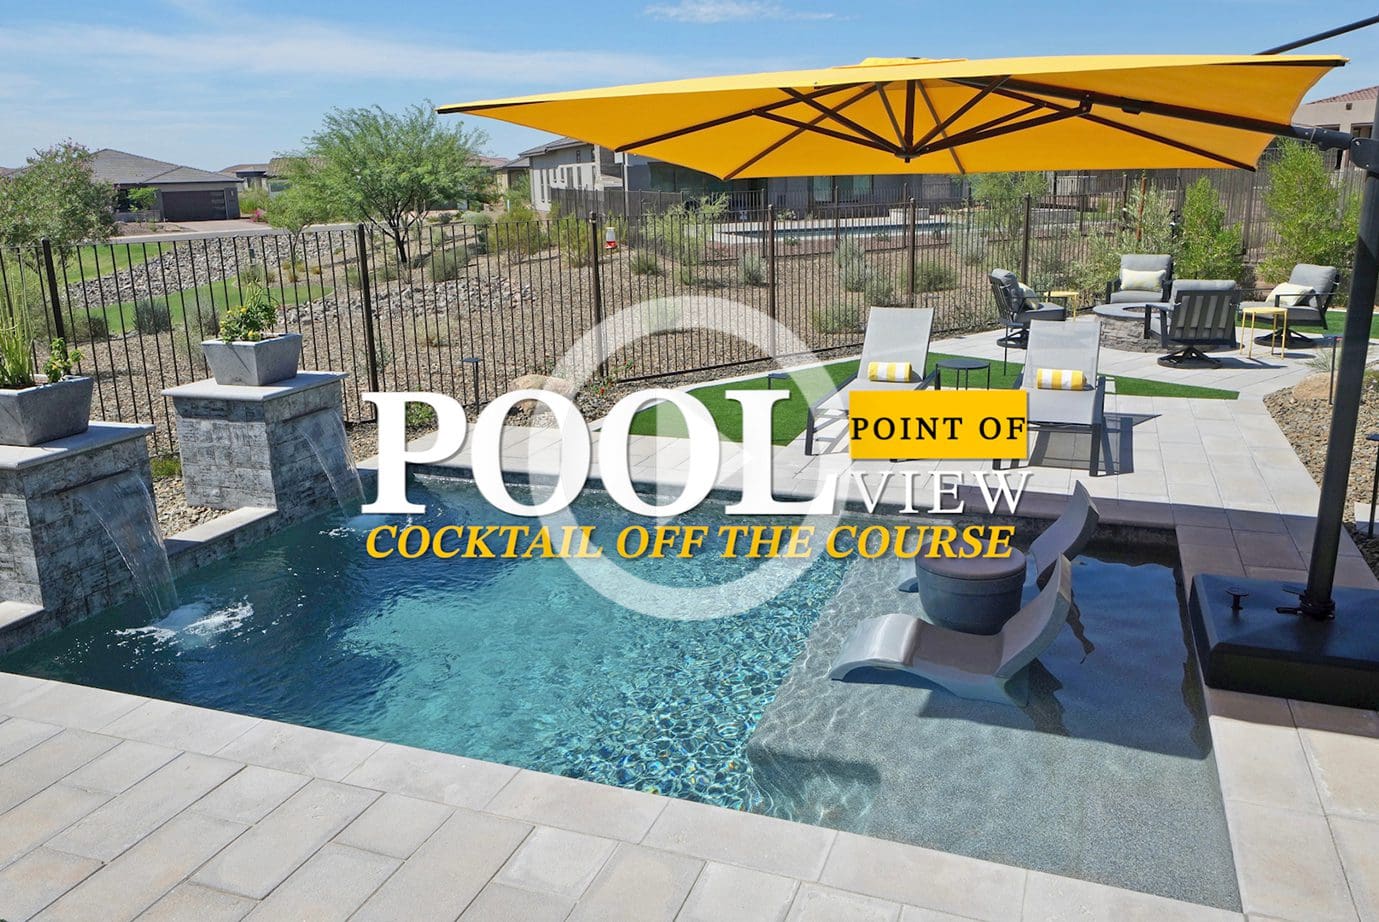 Cocktail Pools: A Unique Perspective on Smaller Backyards